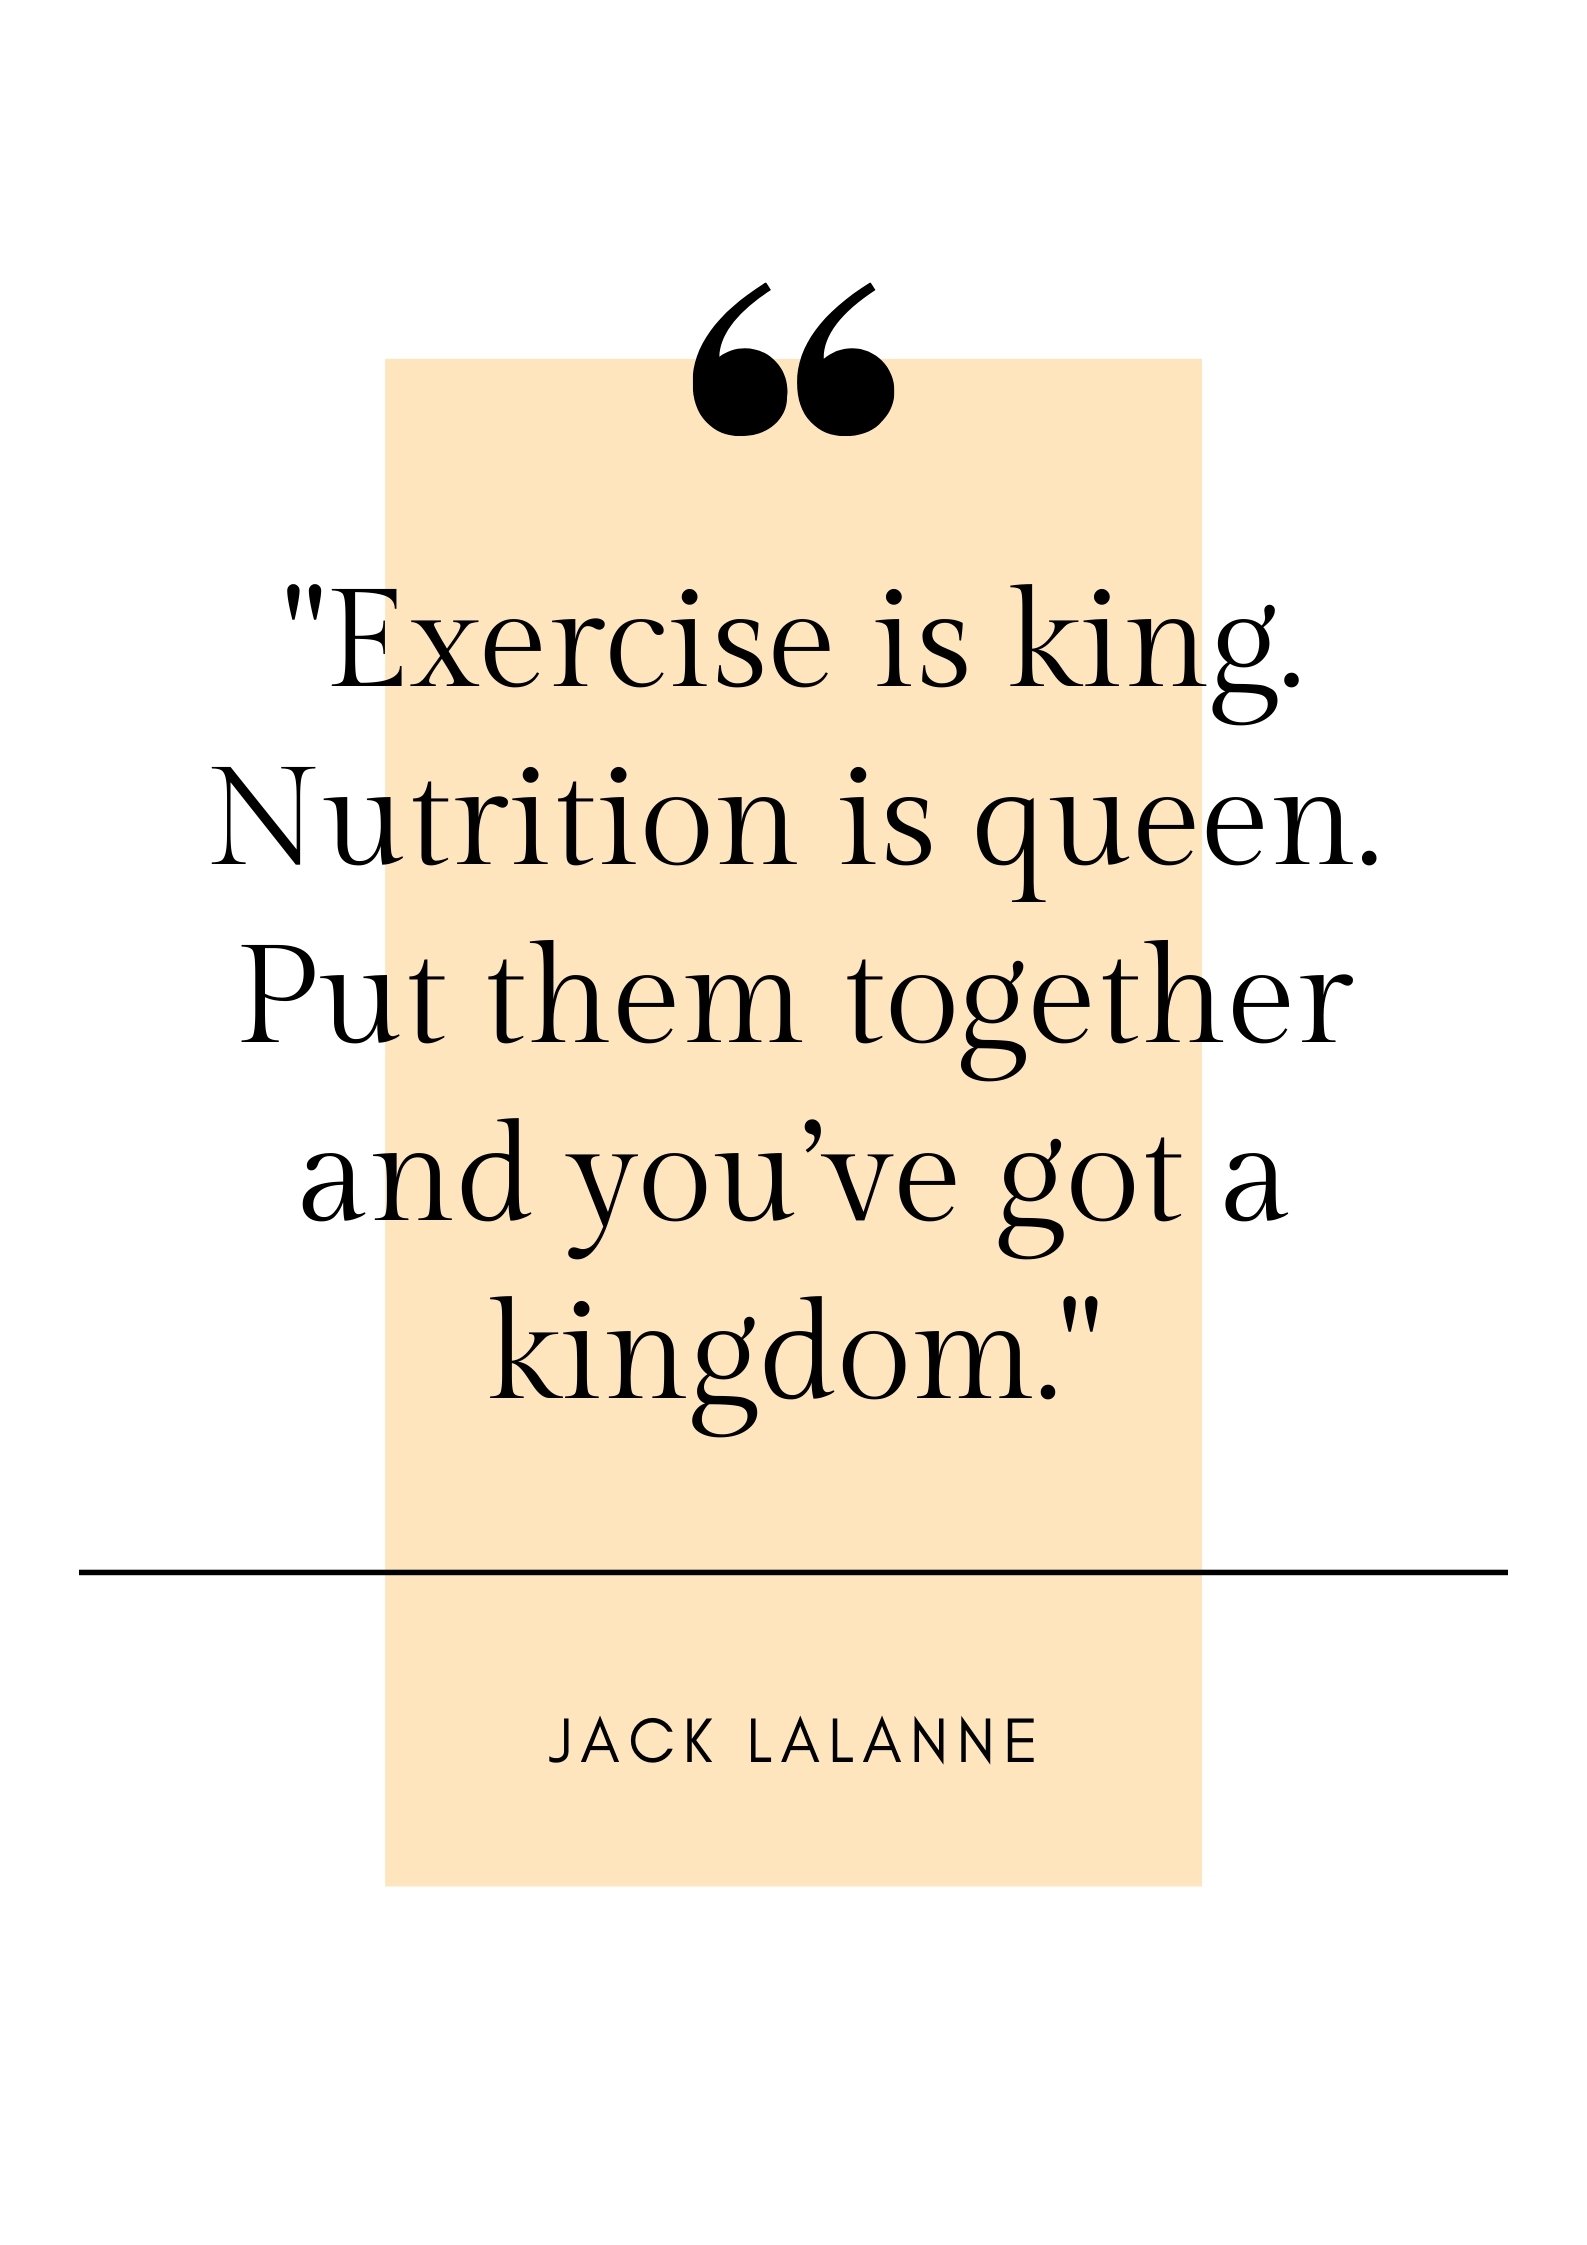 jack lalanne quote